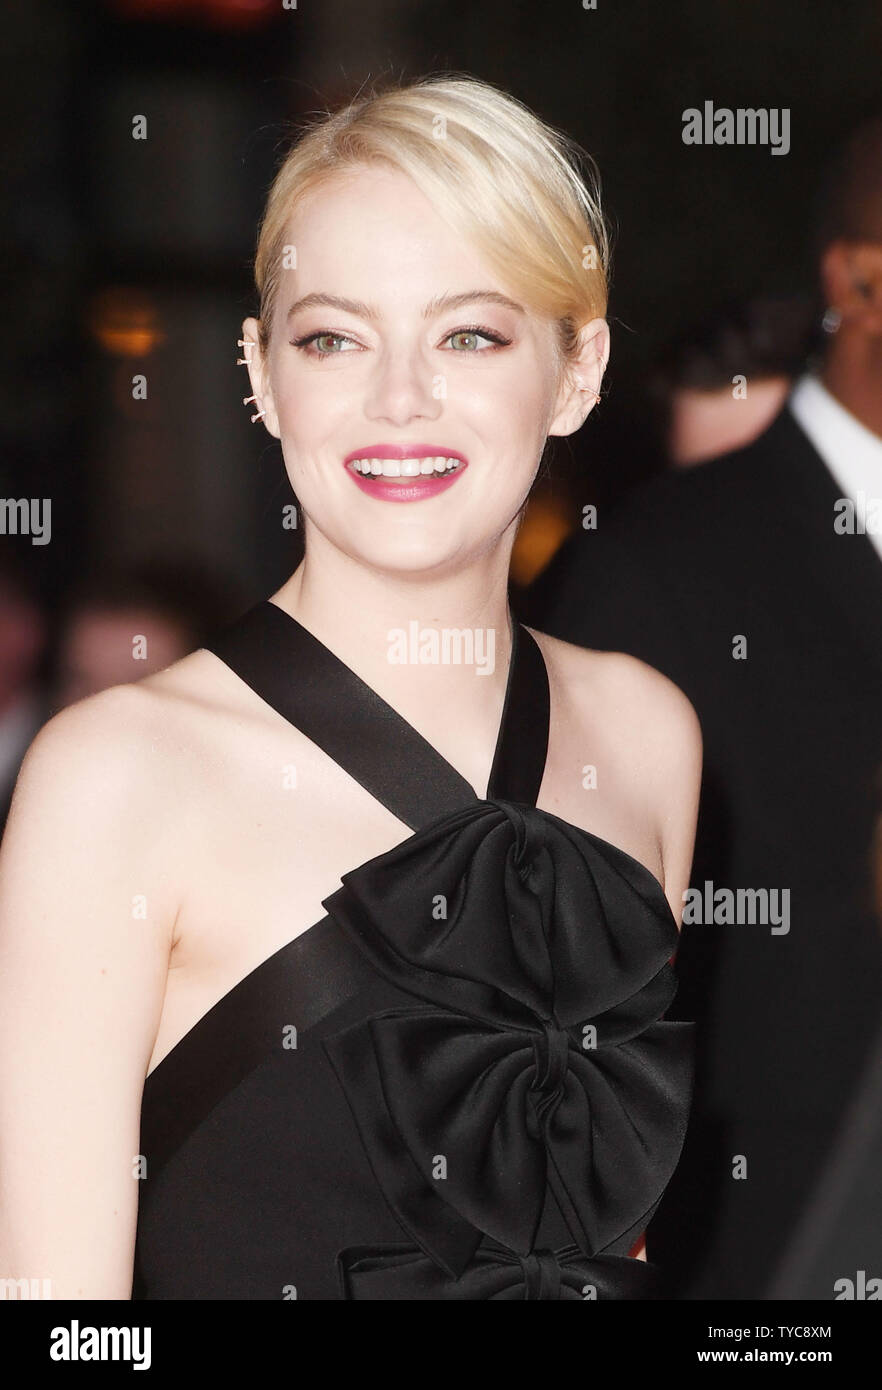 American actress Emma Stone attends the premiere of Killing Of a Sacred Deer during the BFI London Film Festtival in London on October 12, 2017. Photo by Rune Hellestad/ UPI Stock Photo